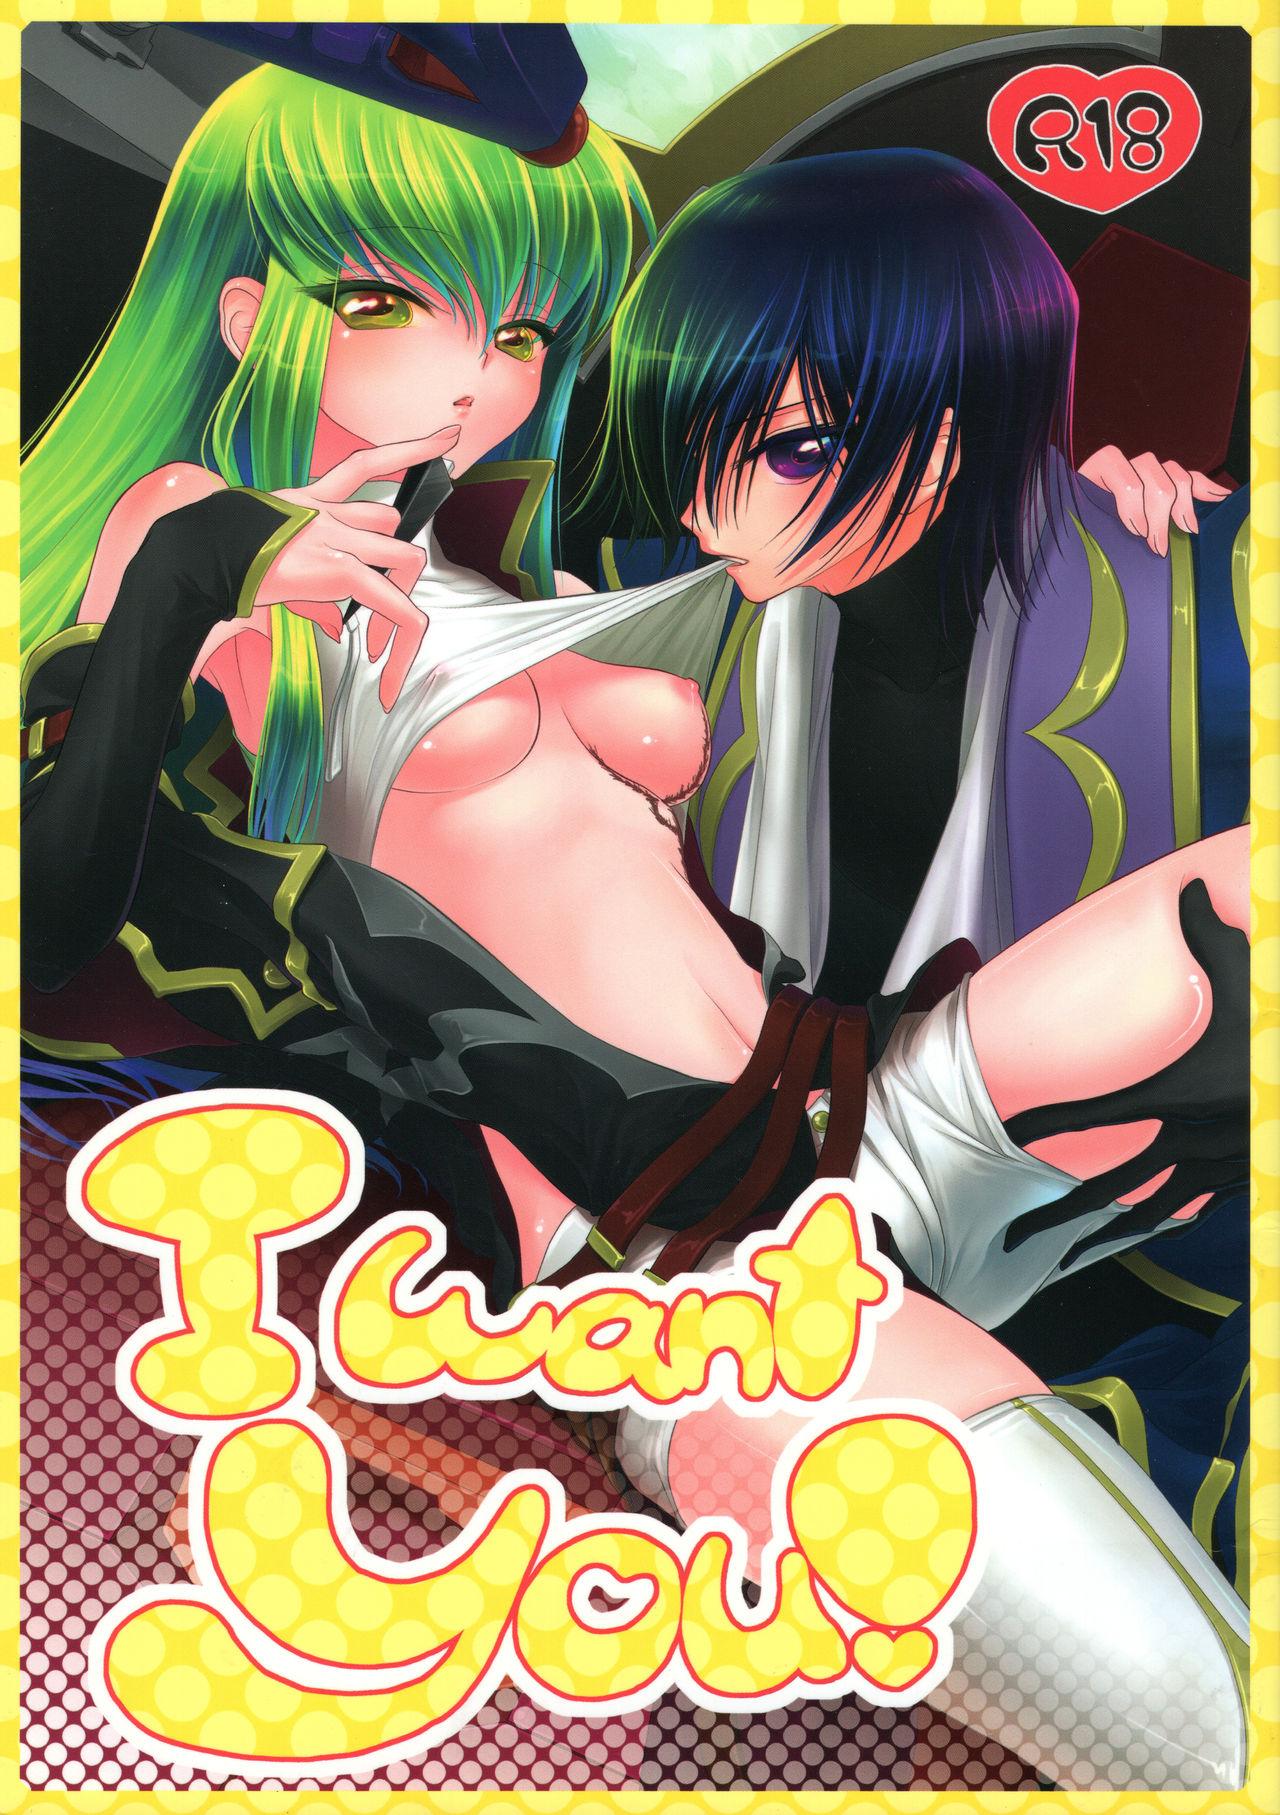 Fitness I want you! - Code geass Hot Whores - Page 1